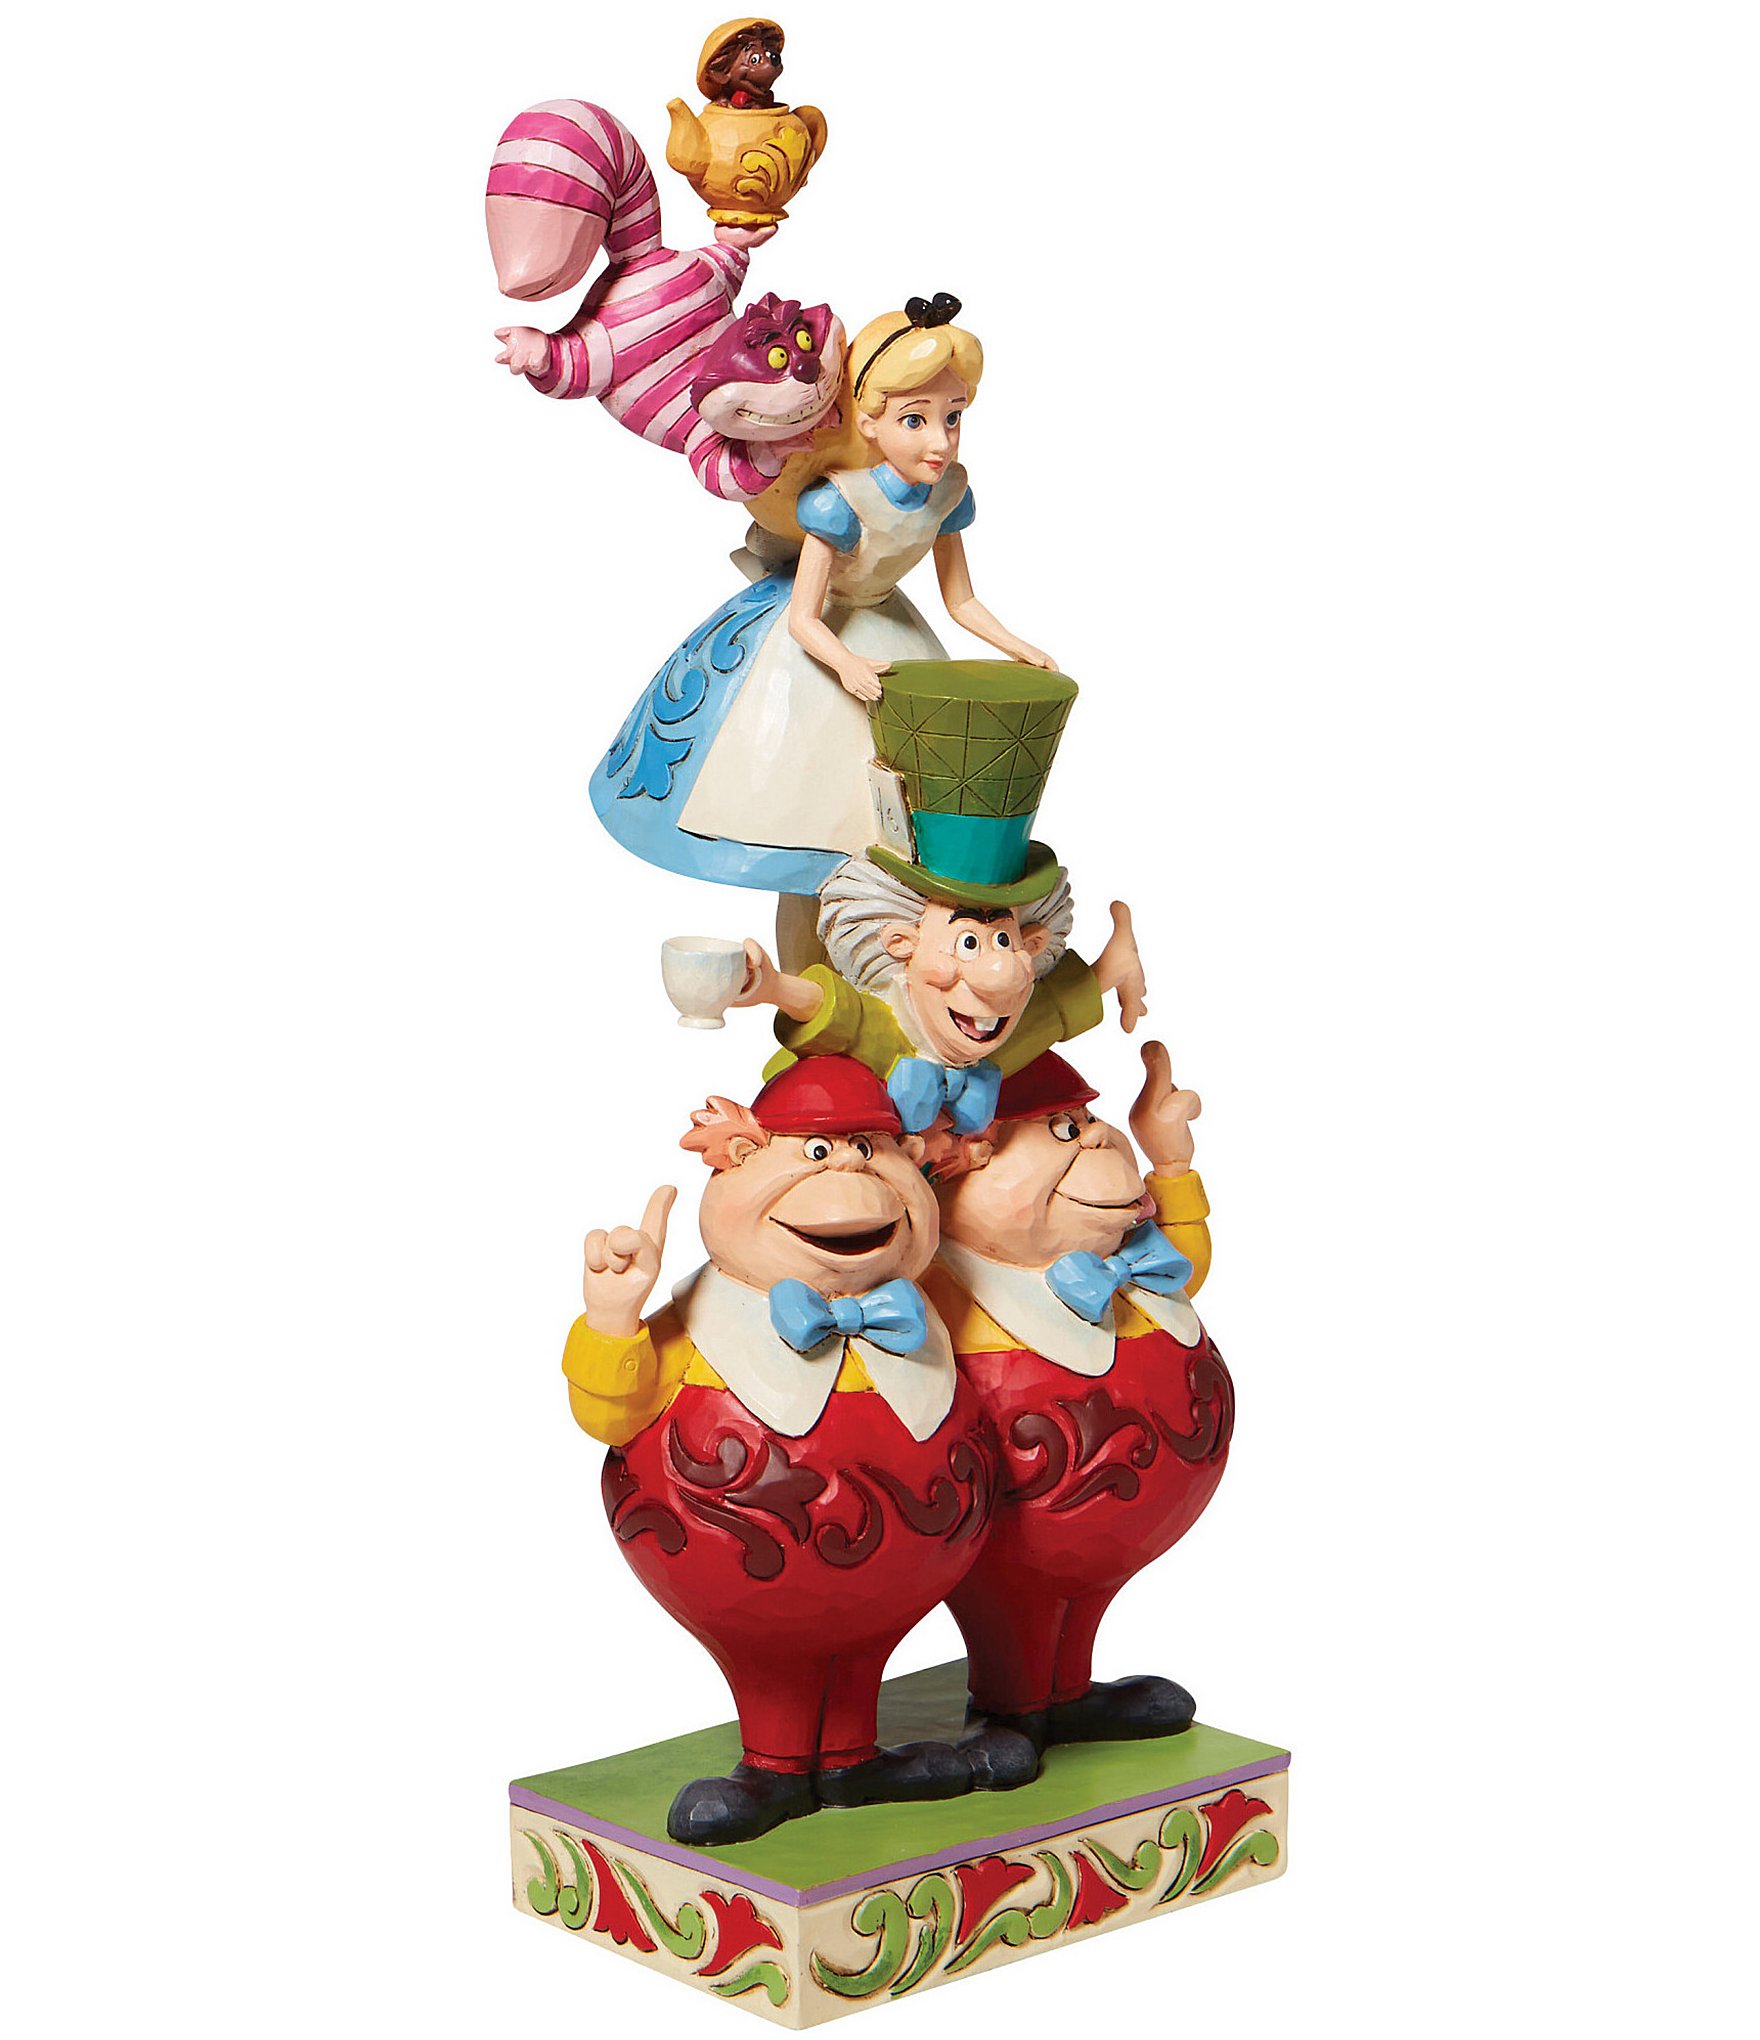 Alice in Wonderland Candle, Alice in Wonderland Gifts, Afternoon